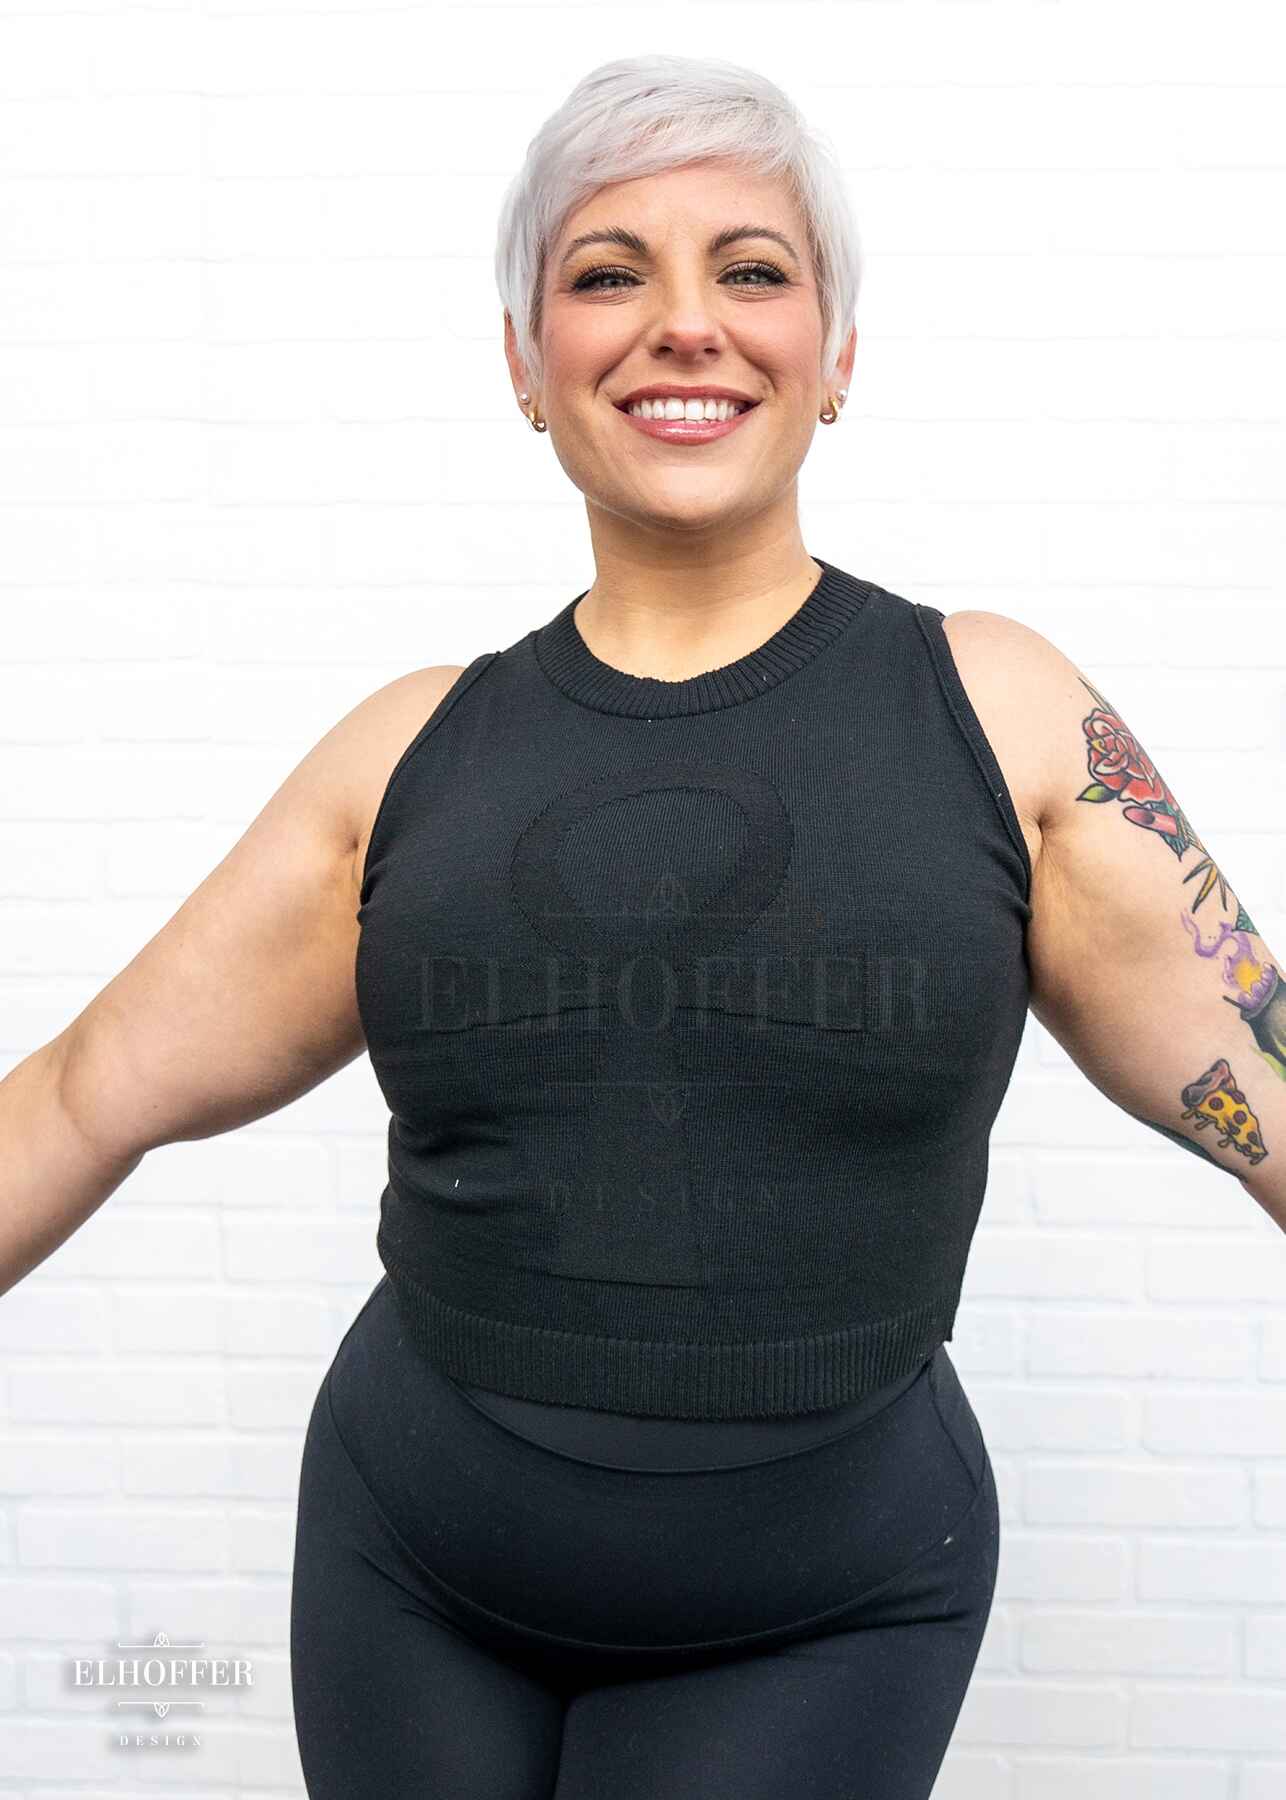 Whitney, a sun kissed skin L model with a platinum blonde pixie cut, is smiling while wearing a sleeveless knit crop top with a large subtle ankh design on the front.